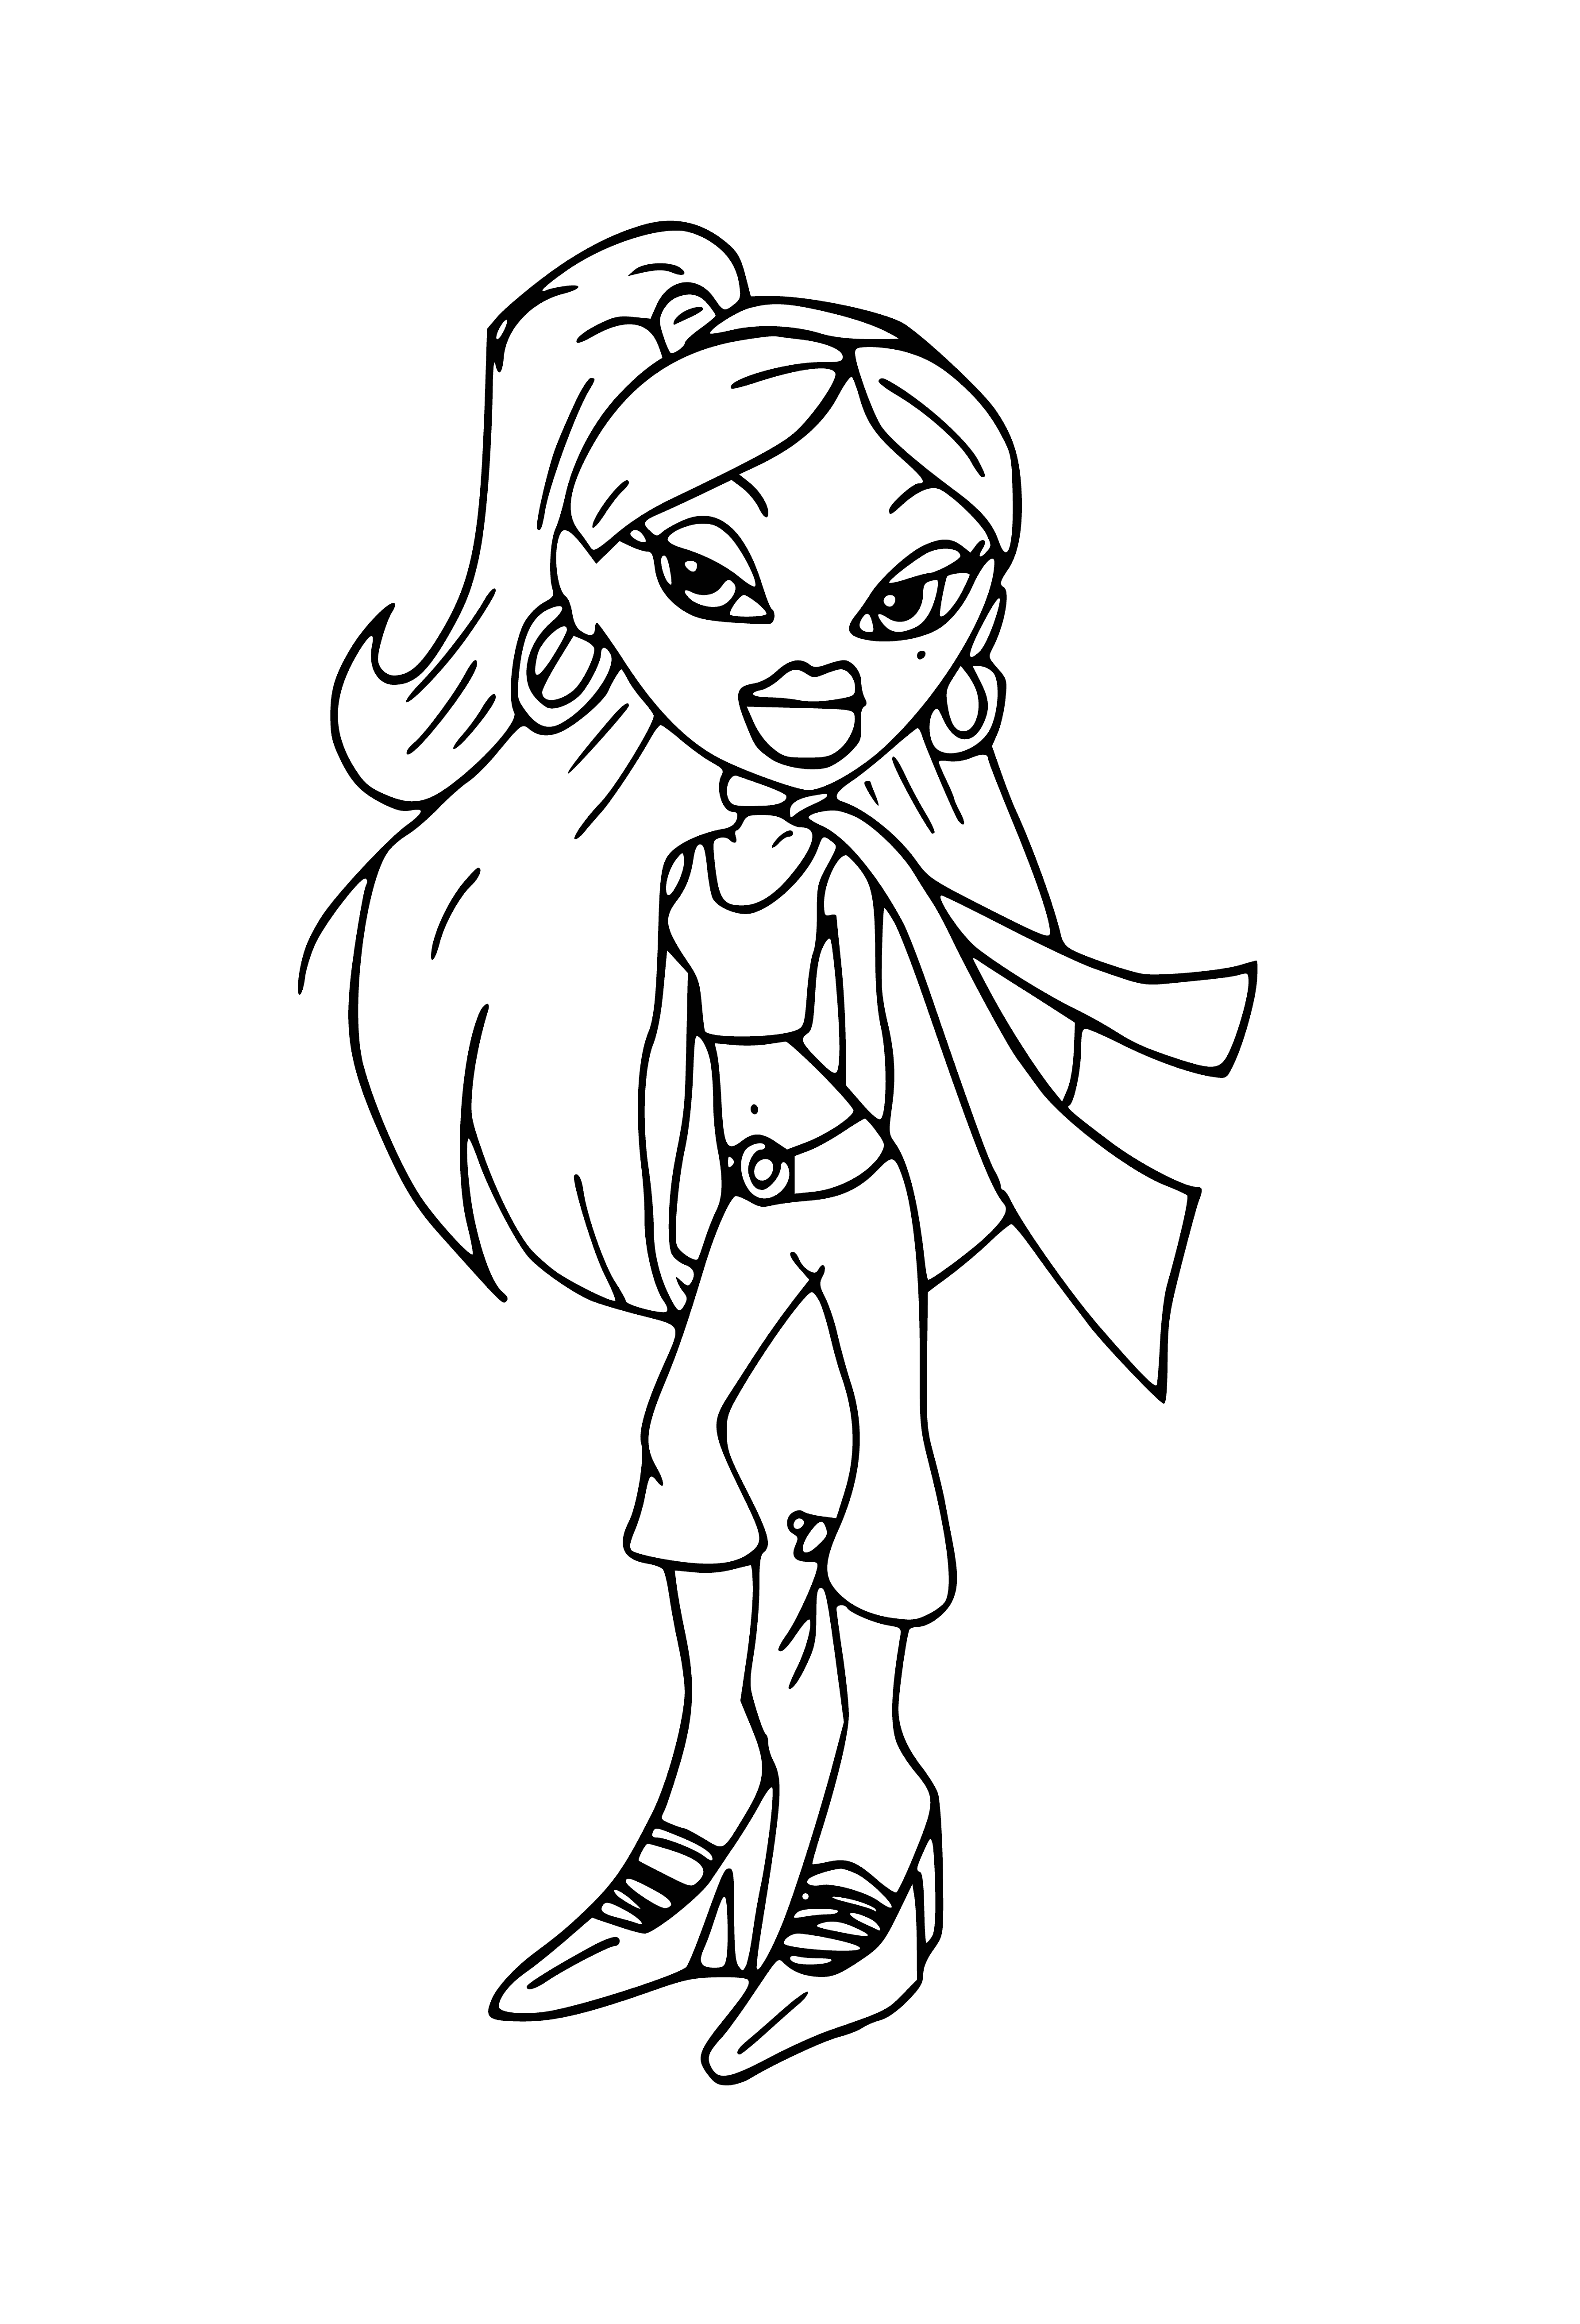 coloring page: Four girls in different poses, long hair, with makeup & jeweled accessories.